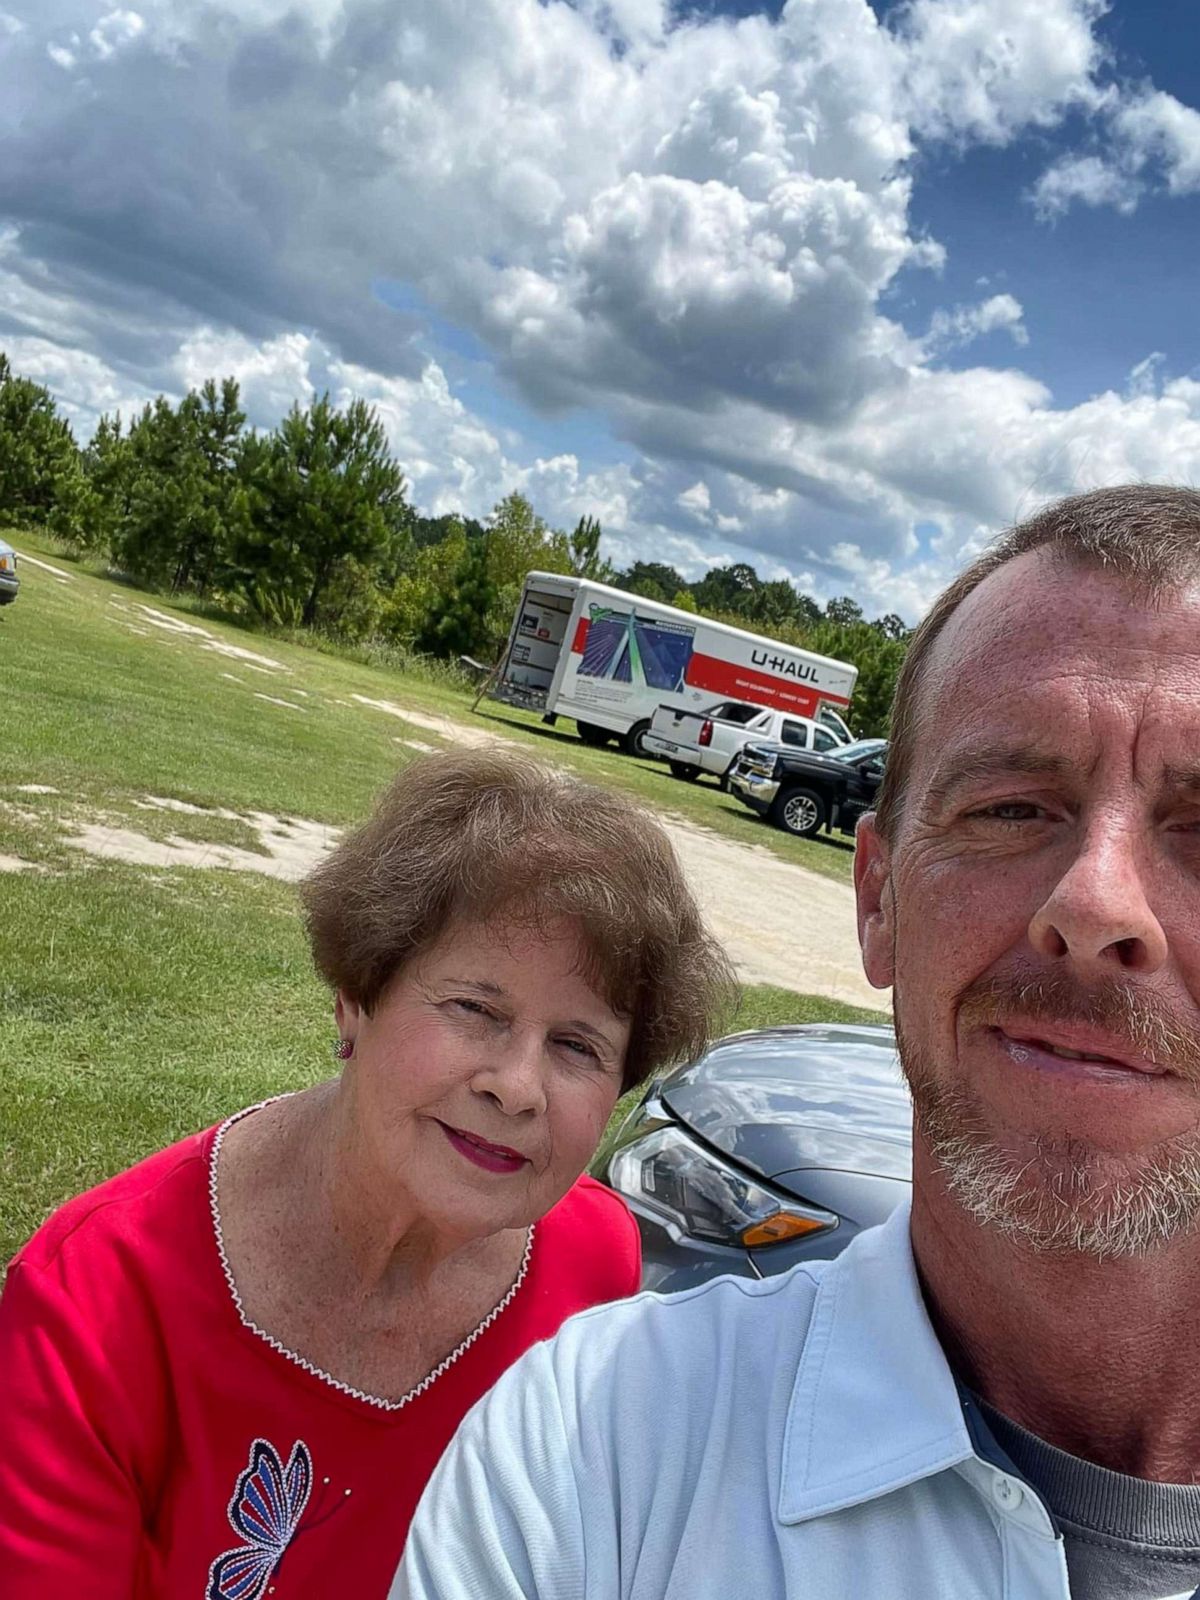 PHOTO: Sean Peacock stands with his mom in front of the U-haul truck in Eastman, Georgia, that will carry the 21 memorial benches to Uvalde, Texas.